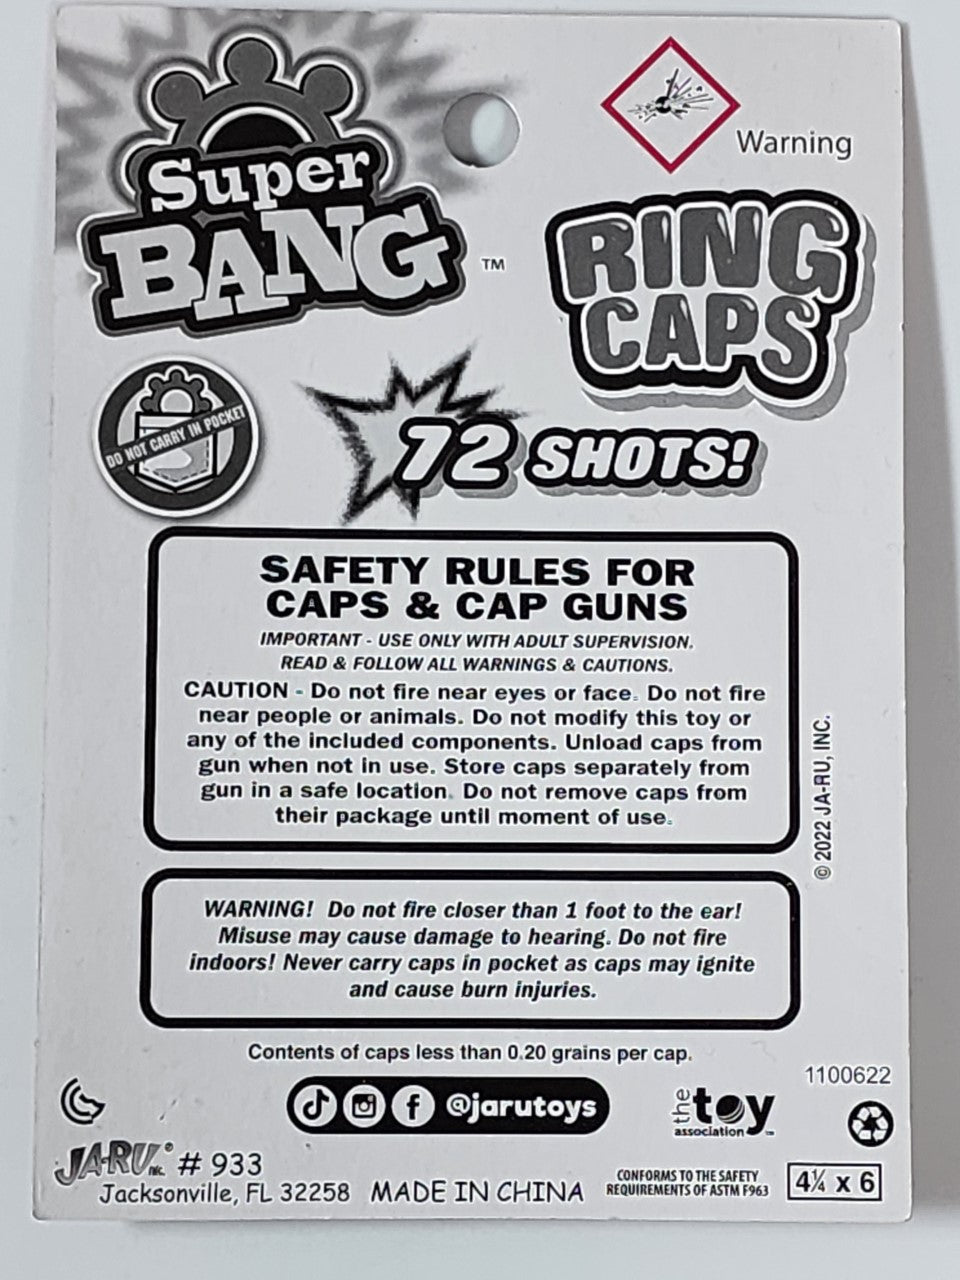 Pack of withering 768, in 8-shot rings, for pistols and toy shotguns. (80  rings of 8 -640 shots-). - AliExpress